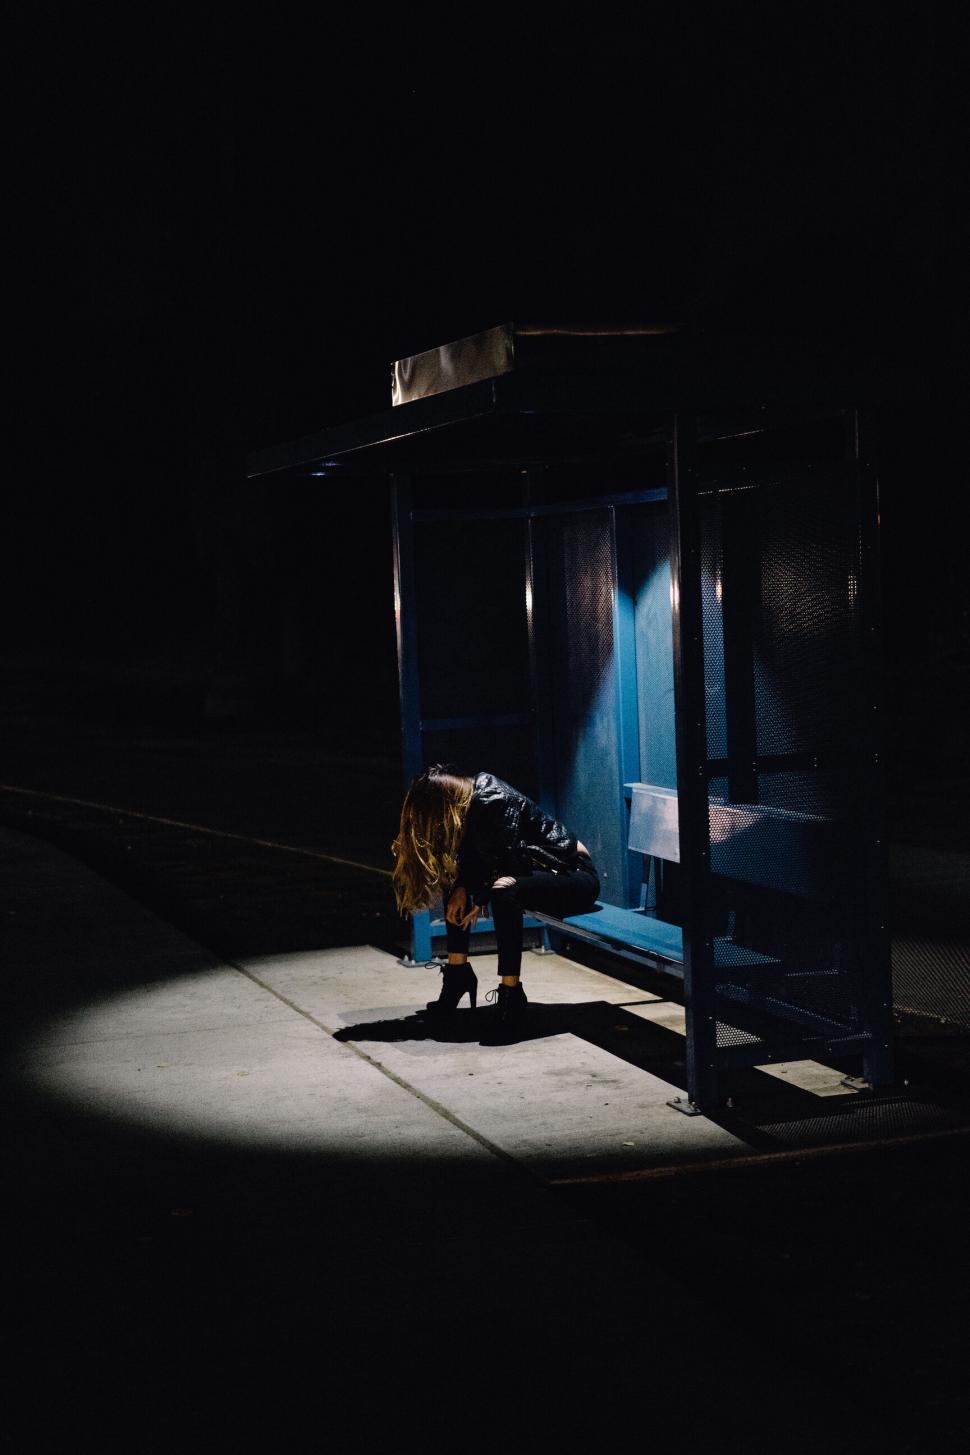 Free Image of Lonely figure at night at a bus stop 